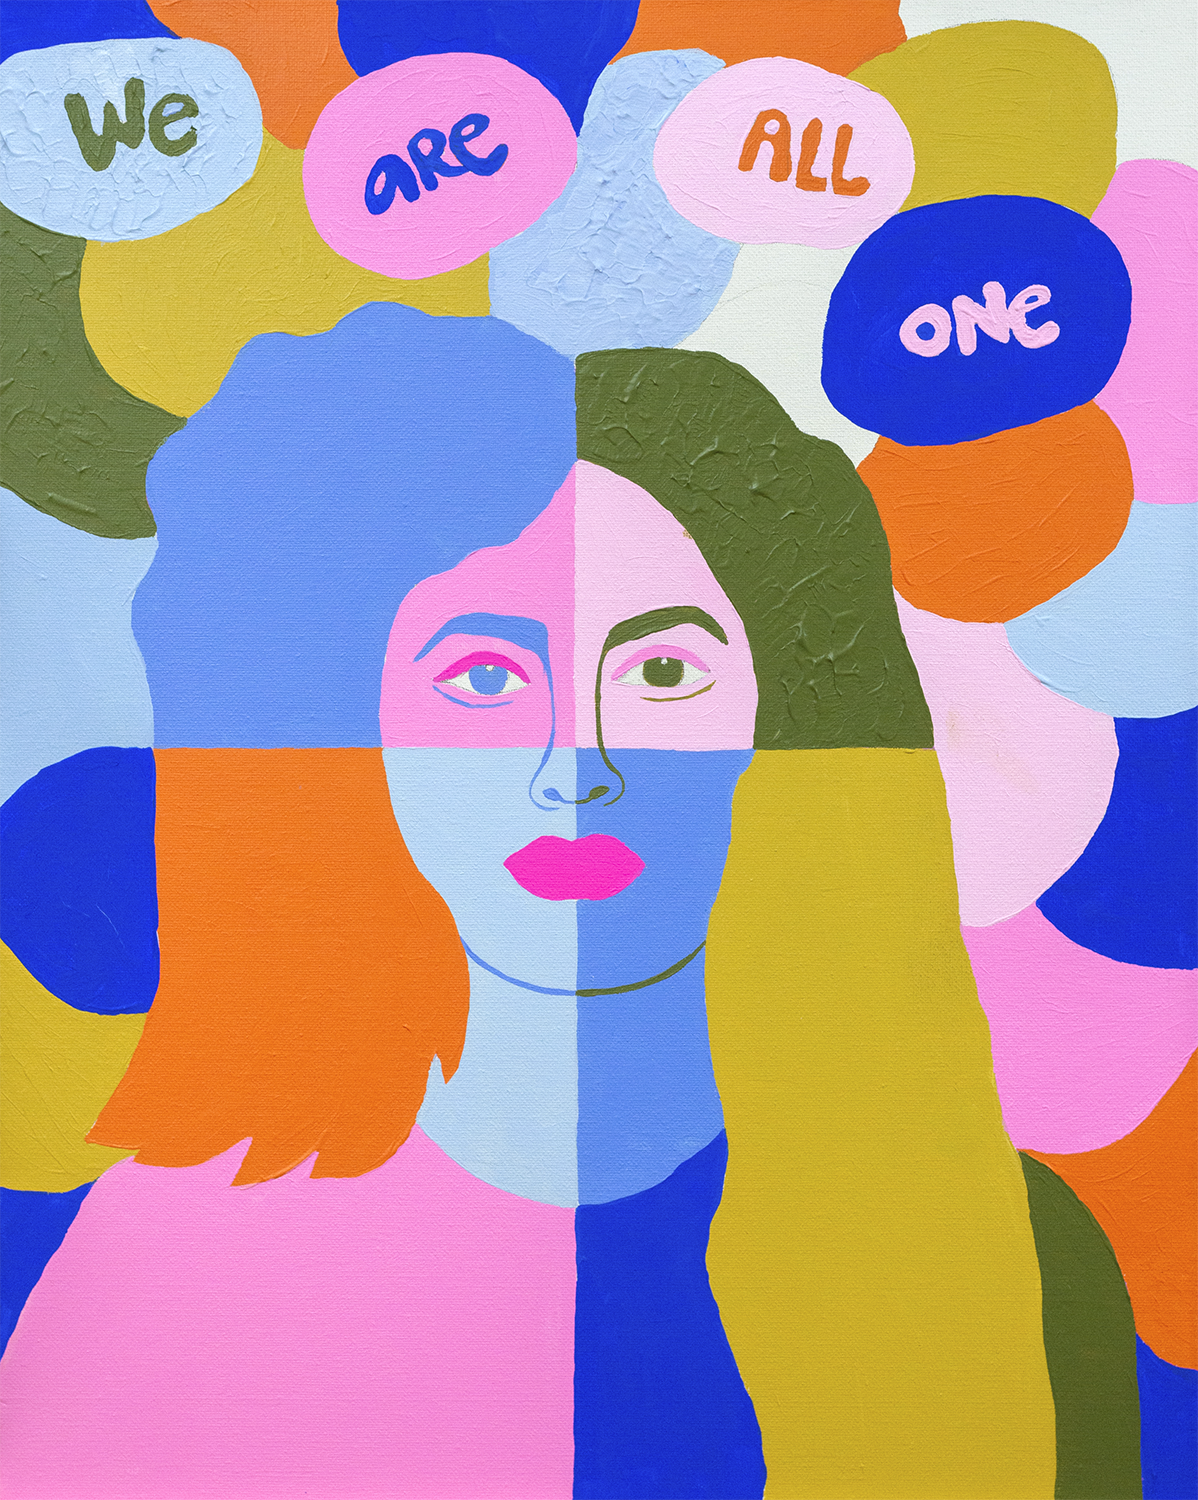 We are all one, acrylic painting by Camila Paz